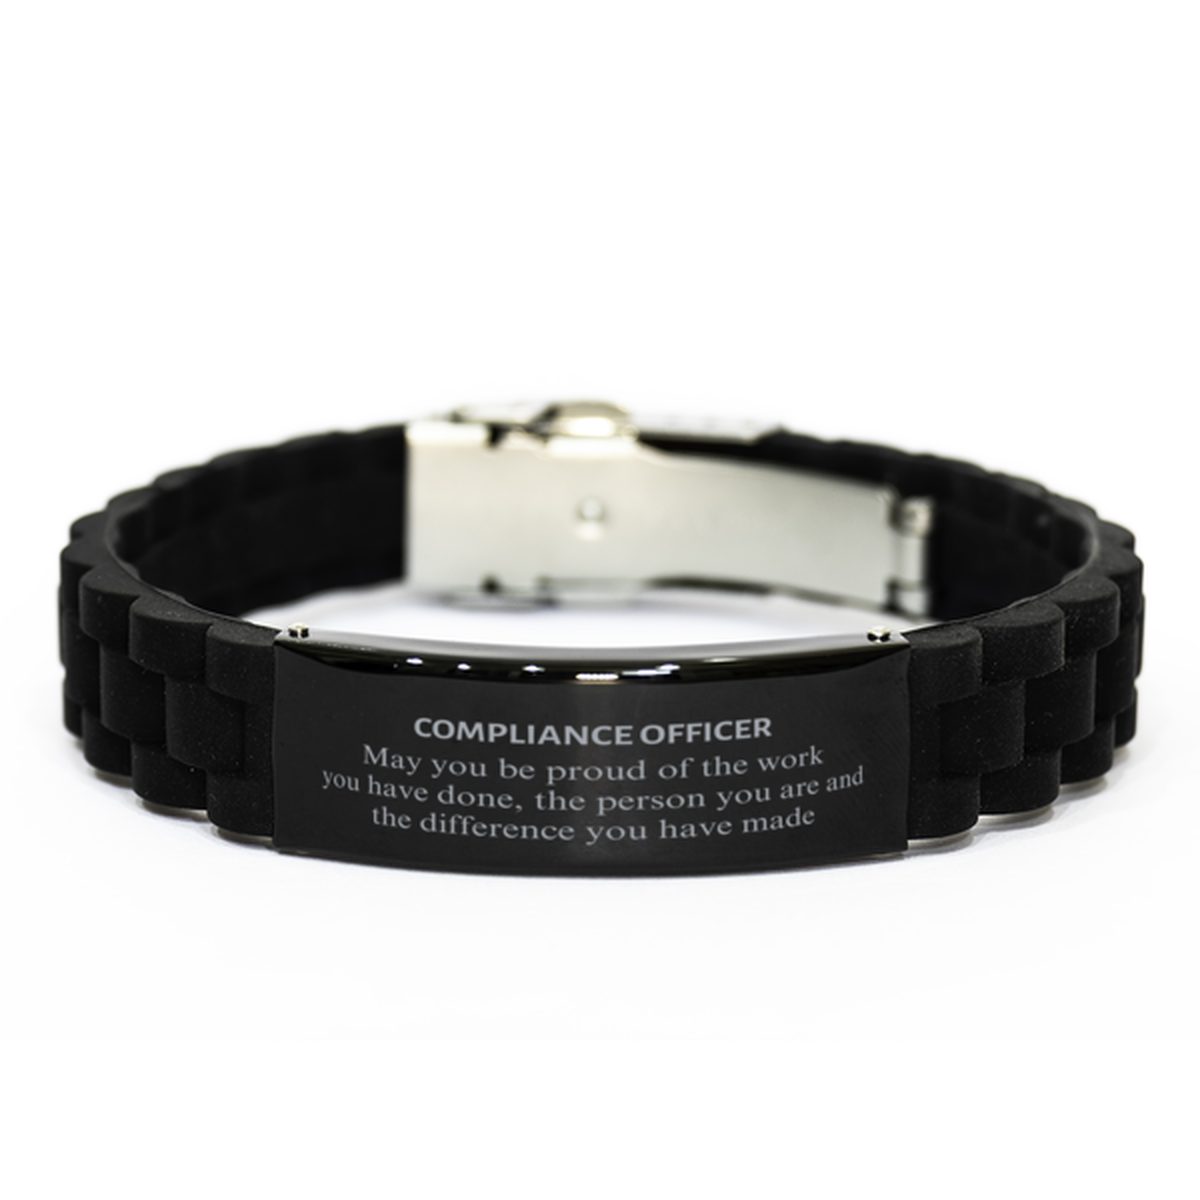 Compliance Officer May you be proud of the work you have done, Retirement Compliance Officer Black Glidelock Clasp Bracelet for Colleague Appreciation Gifts Amazing for Compliance Officer